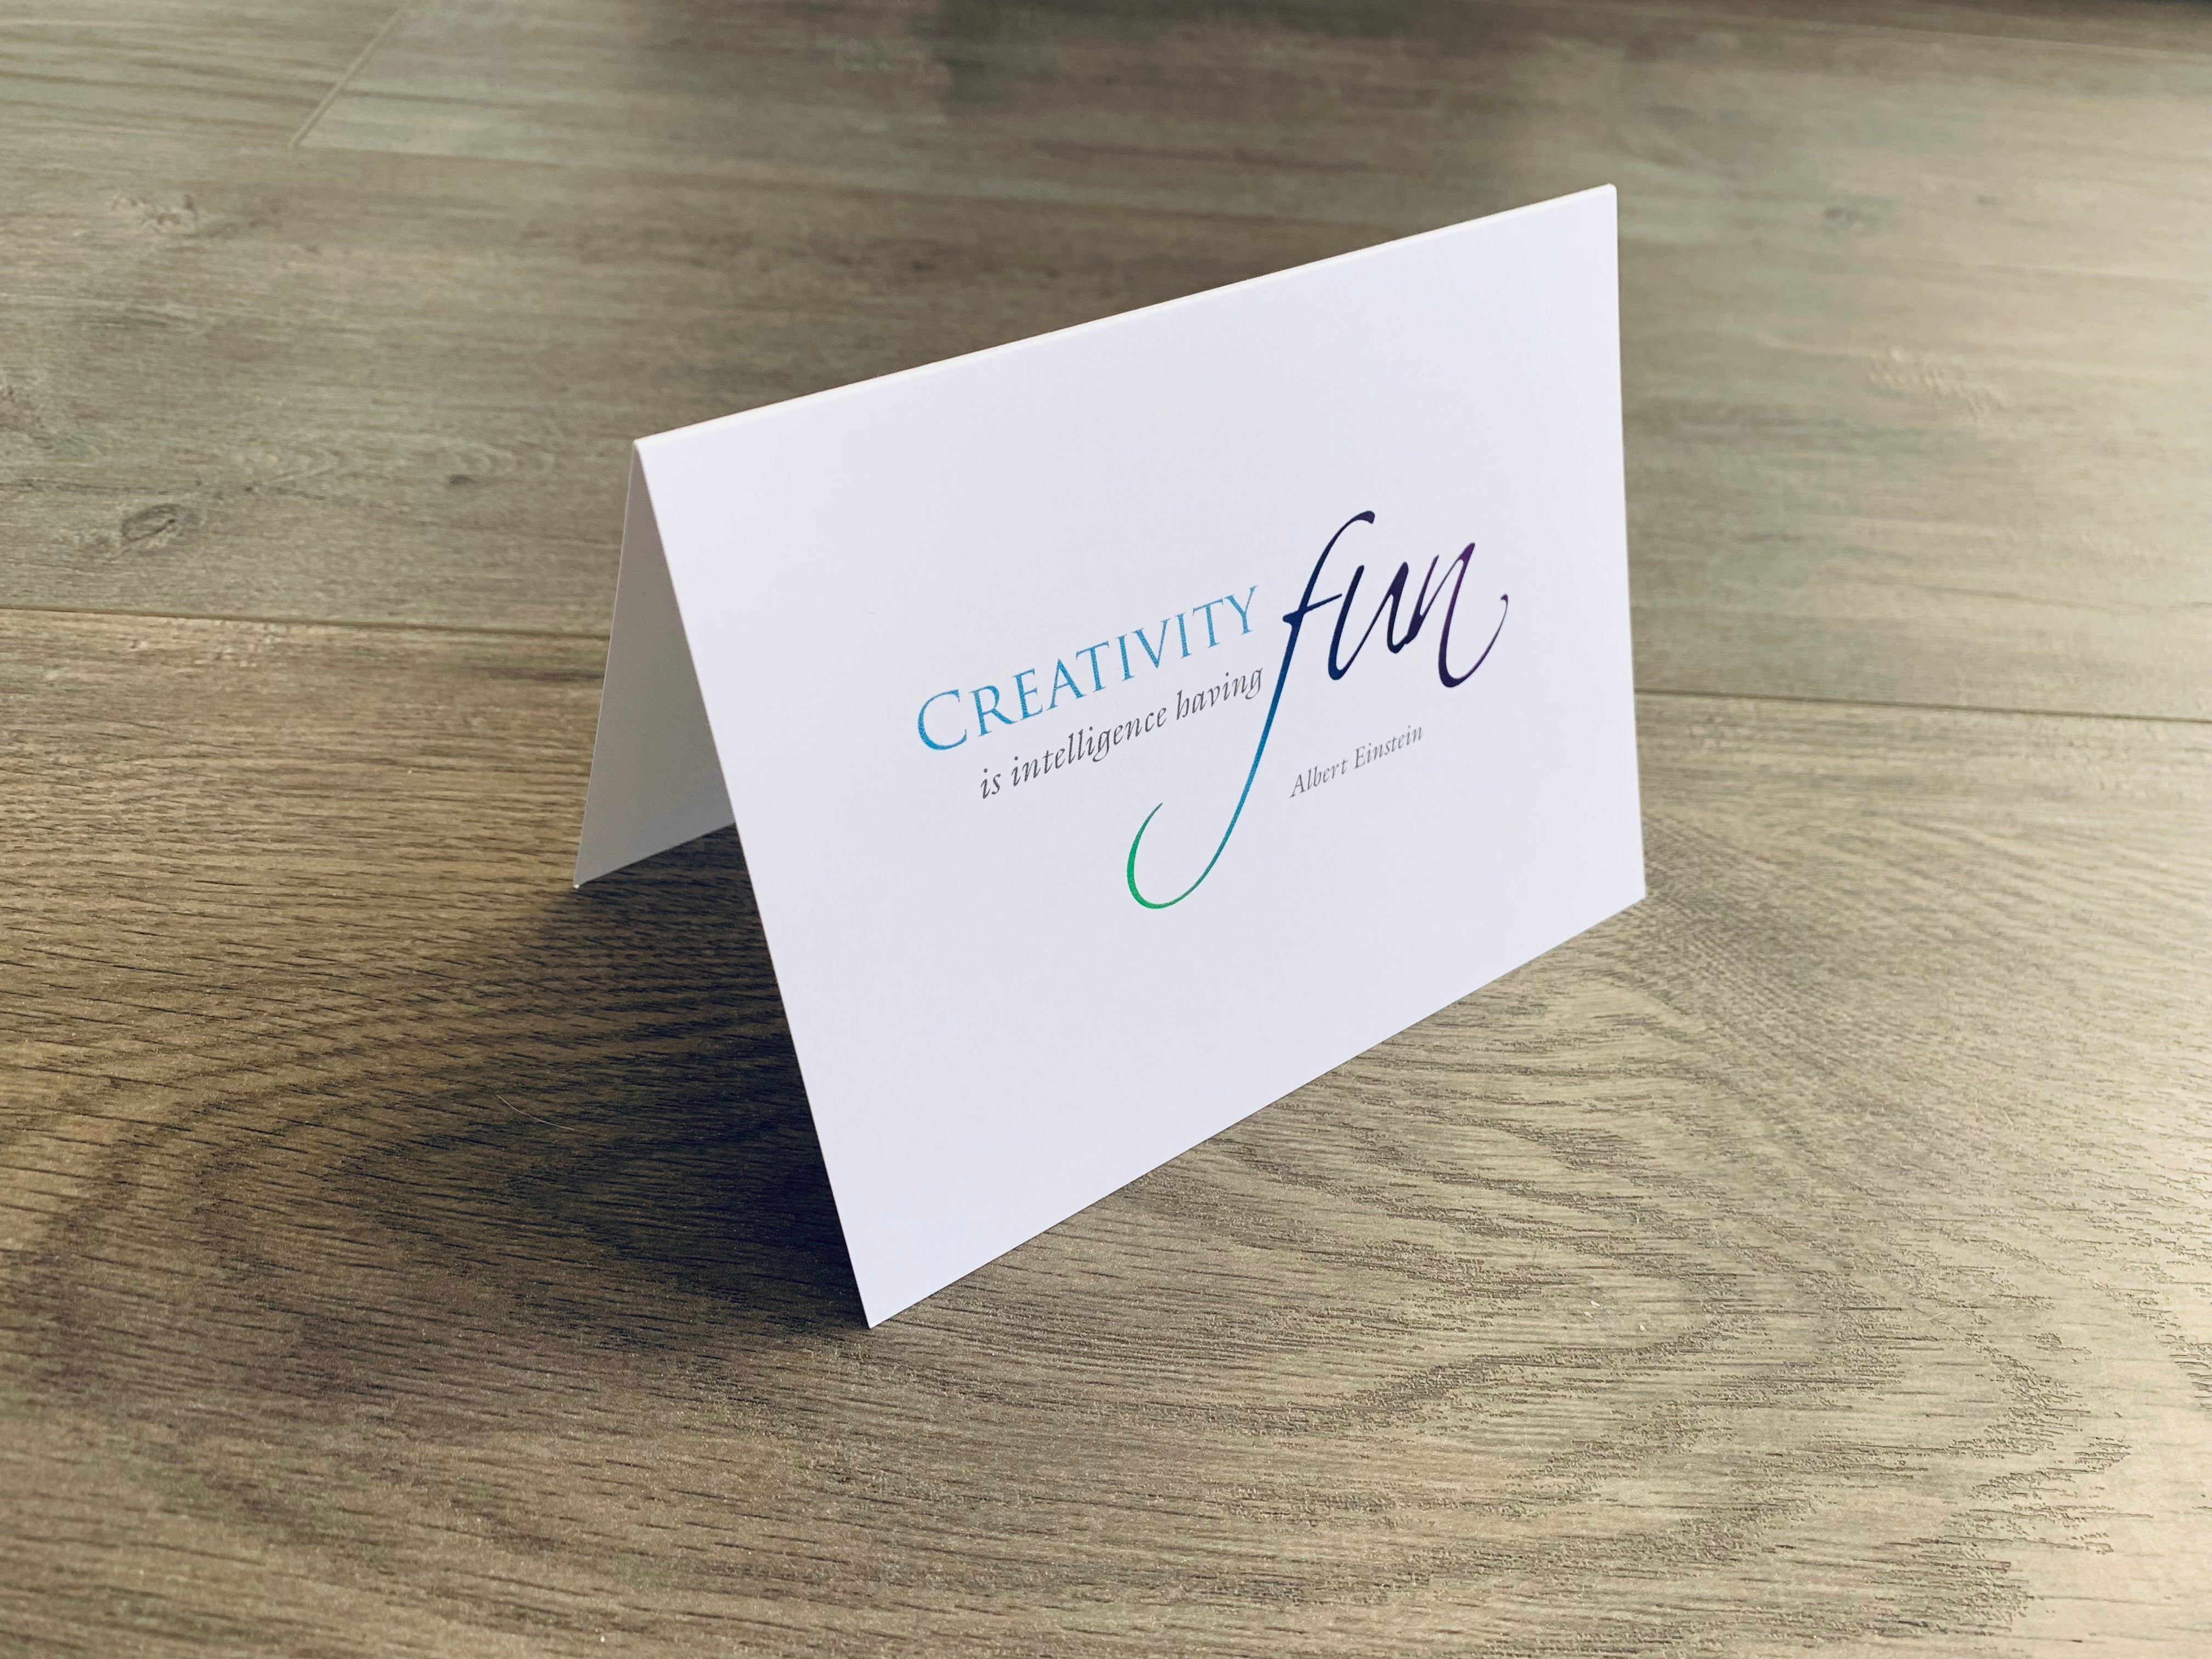 A white, folded notecard sits on a wooden floor. The card hosts an Albert Einstein quote. It says, "Creativity is intelligence having fun." Creativity collection by Stationare.